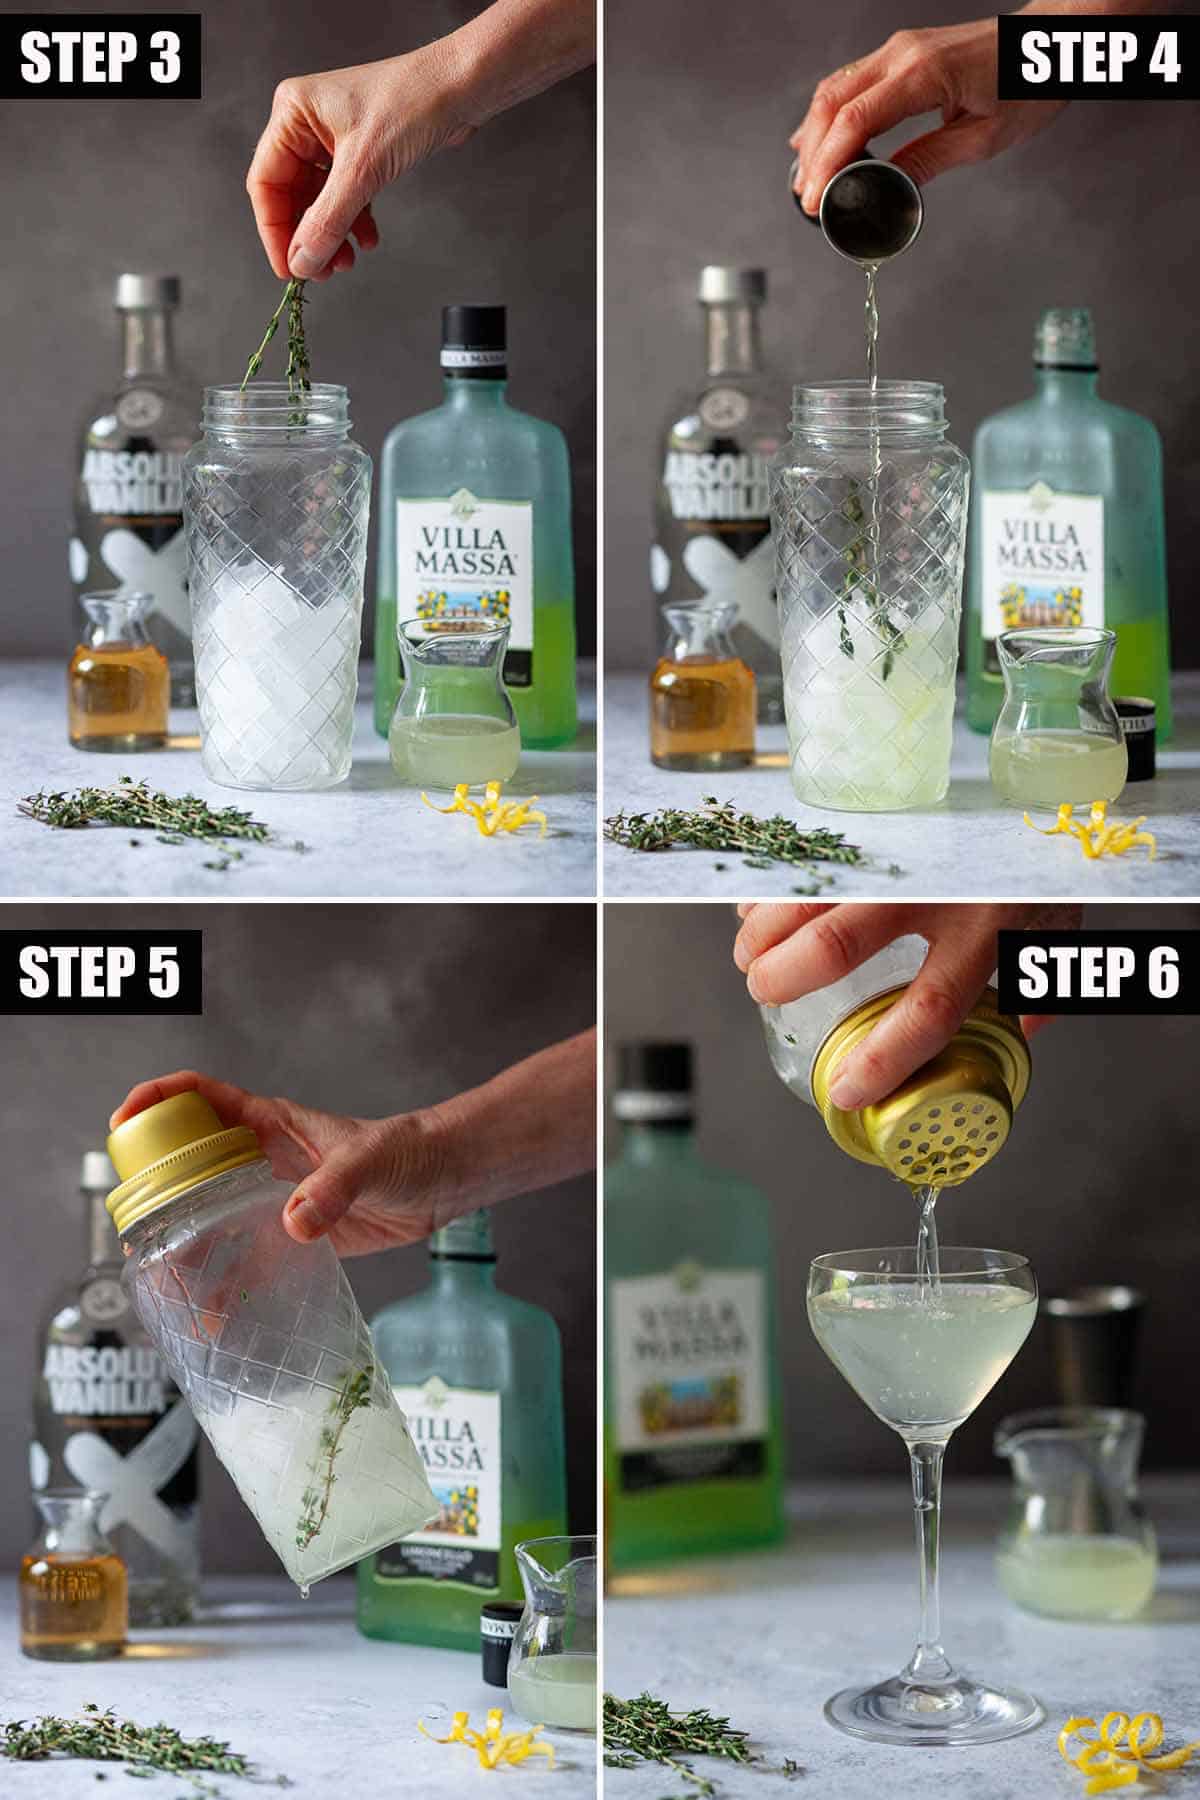 Step-by-step collage of images showing a limoncello cocktail being made.